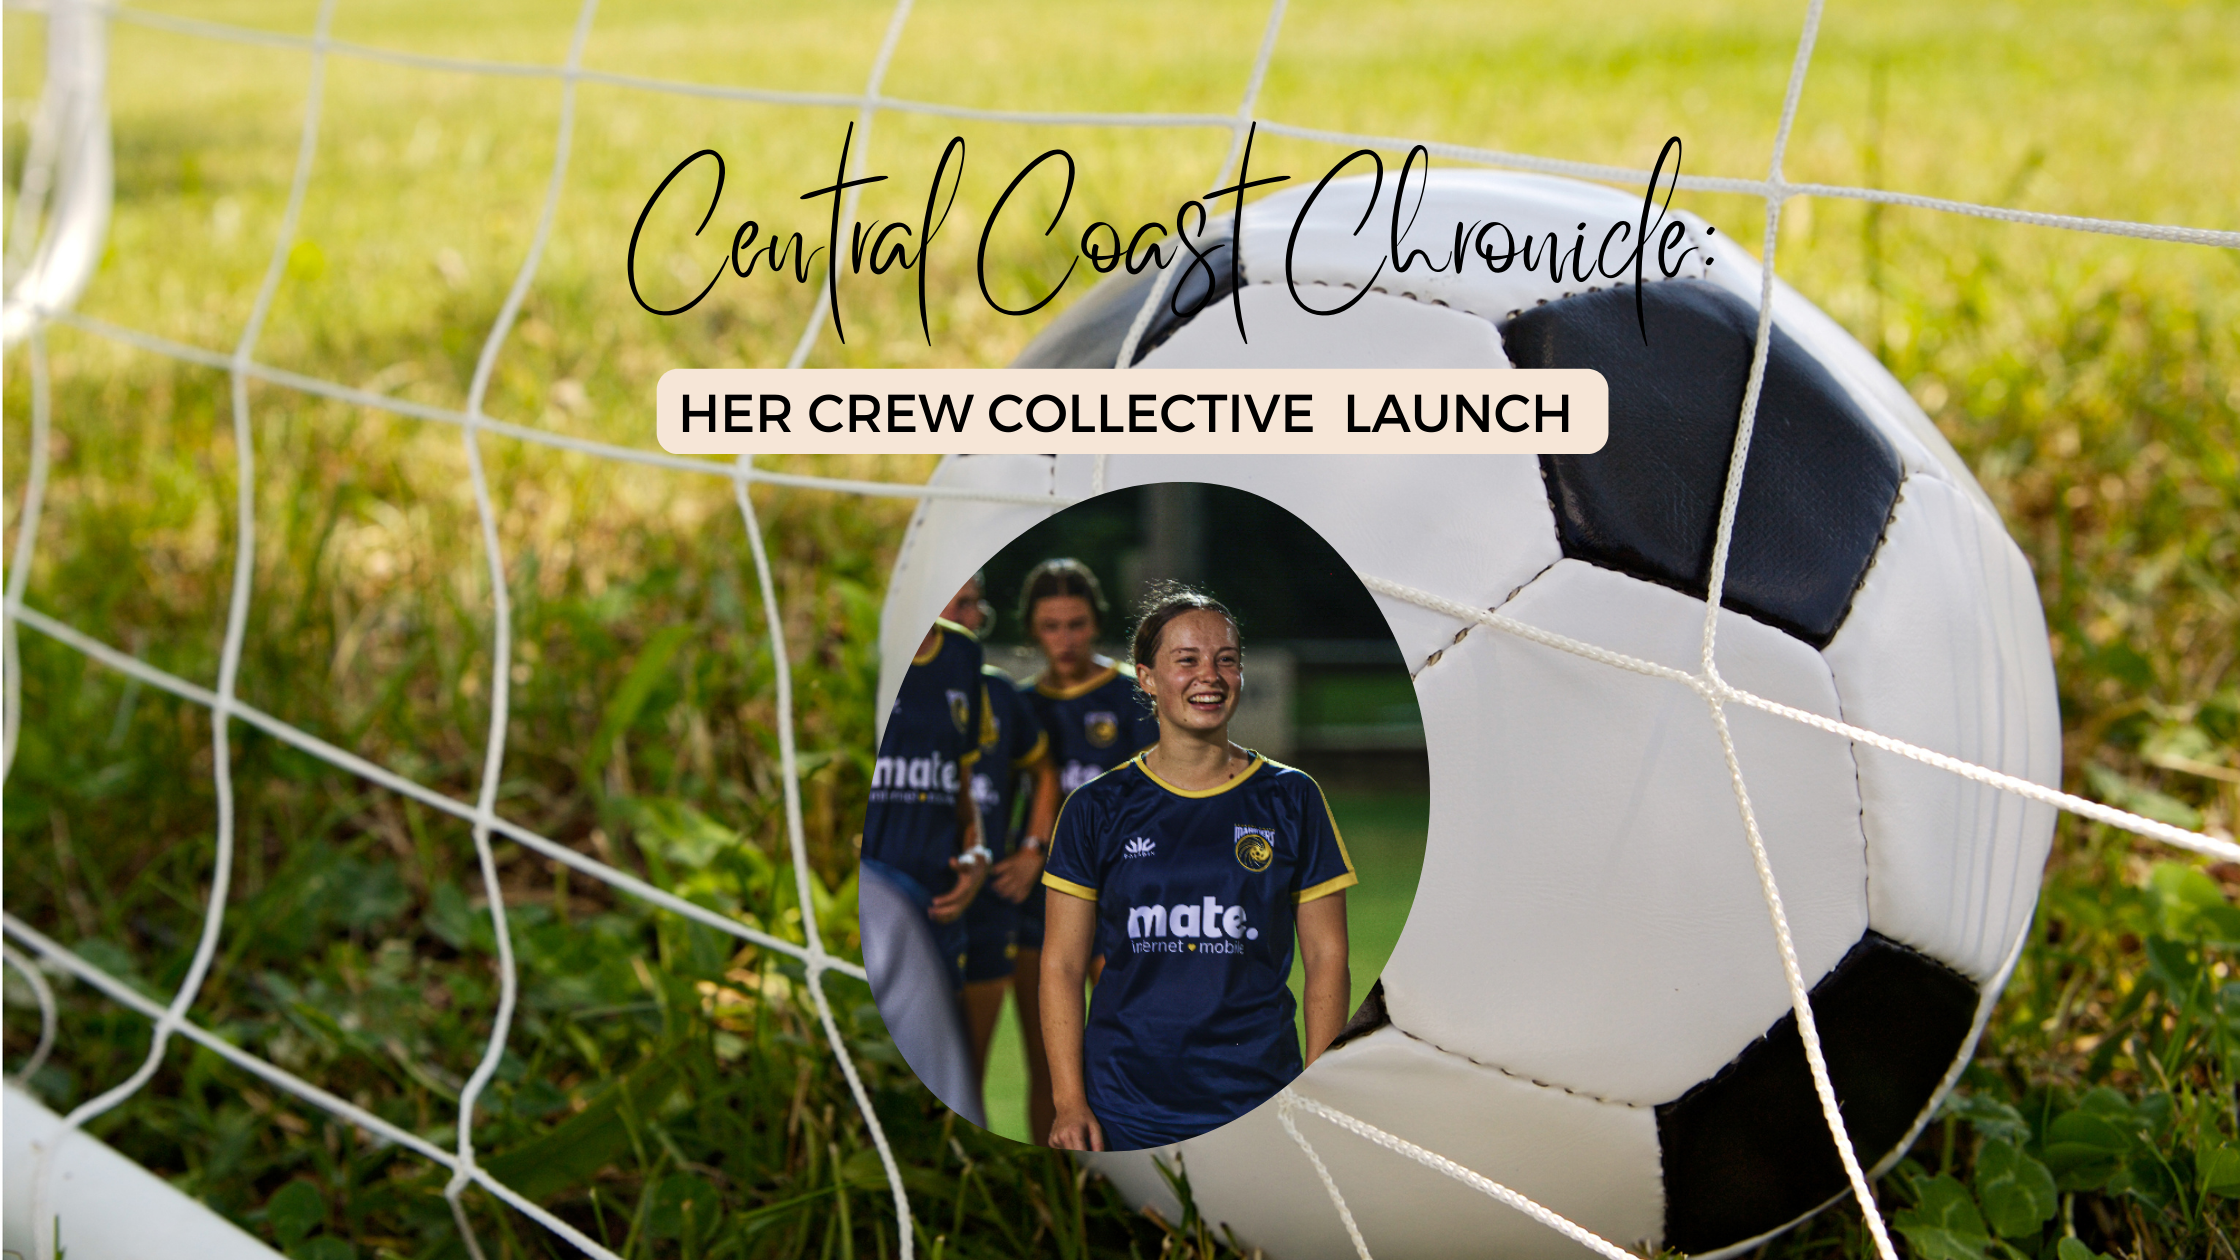 HER CREW COLLECTIVE LAUNCH pictures a girl in soccer jersey smiling with a soccer ball in a net